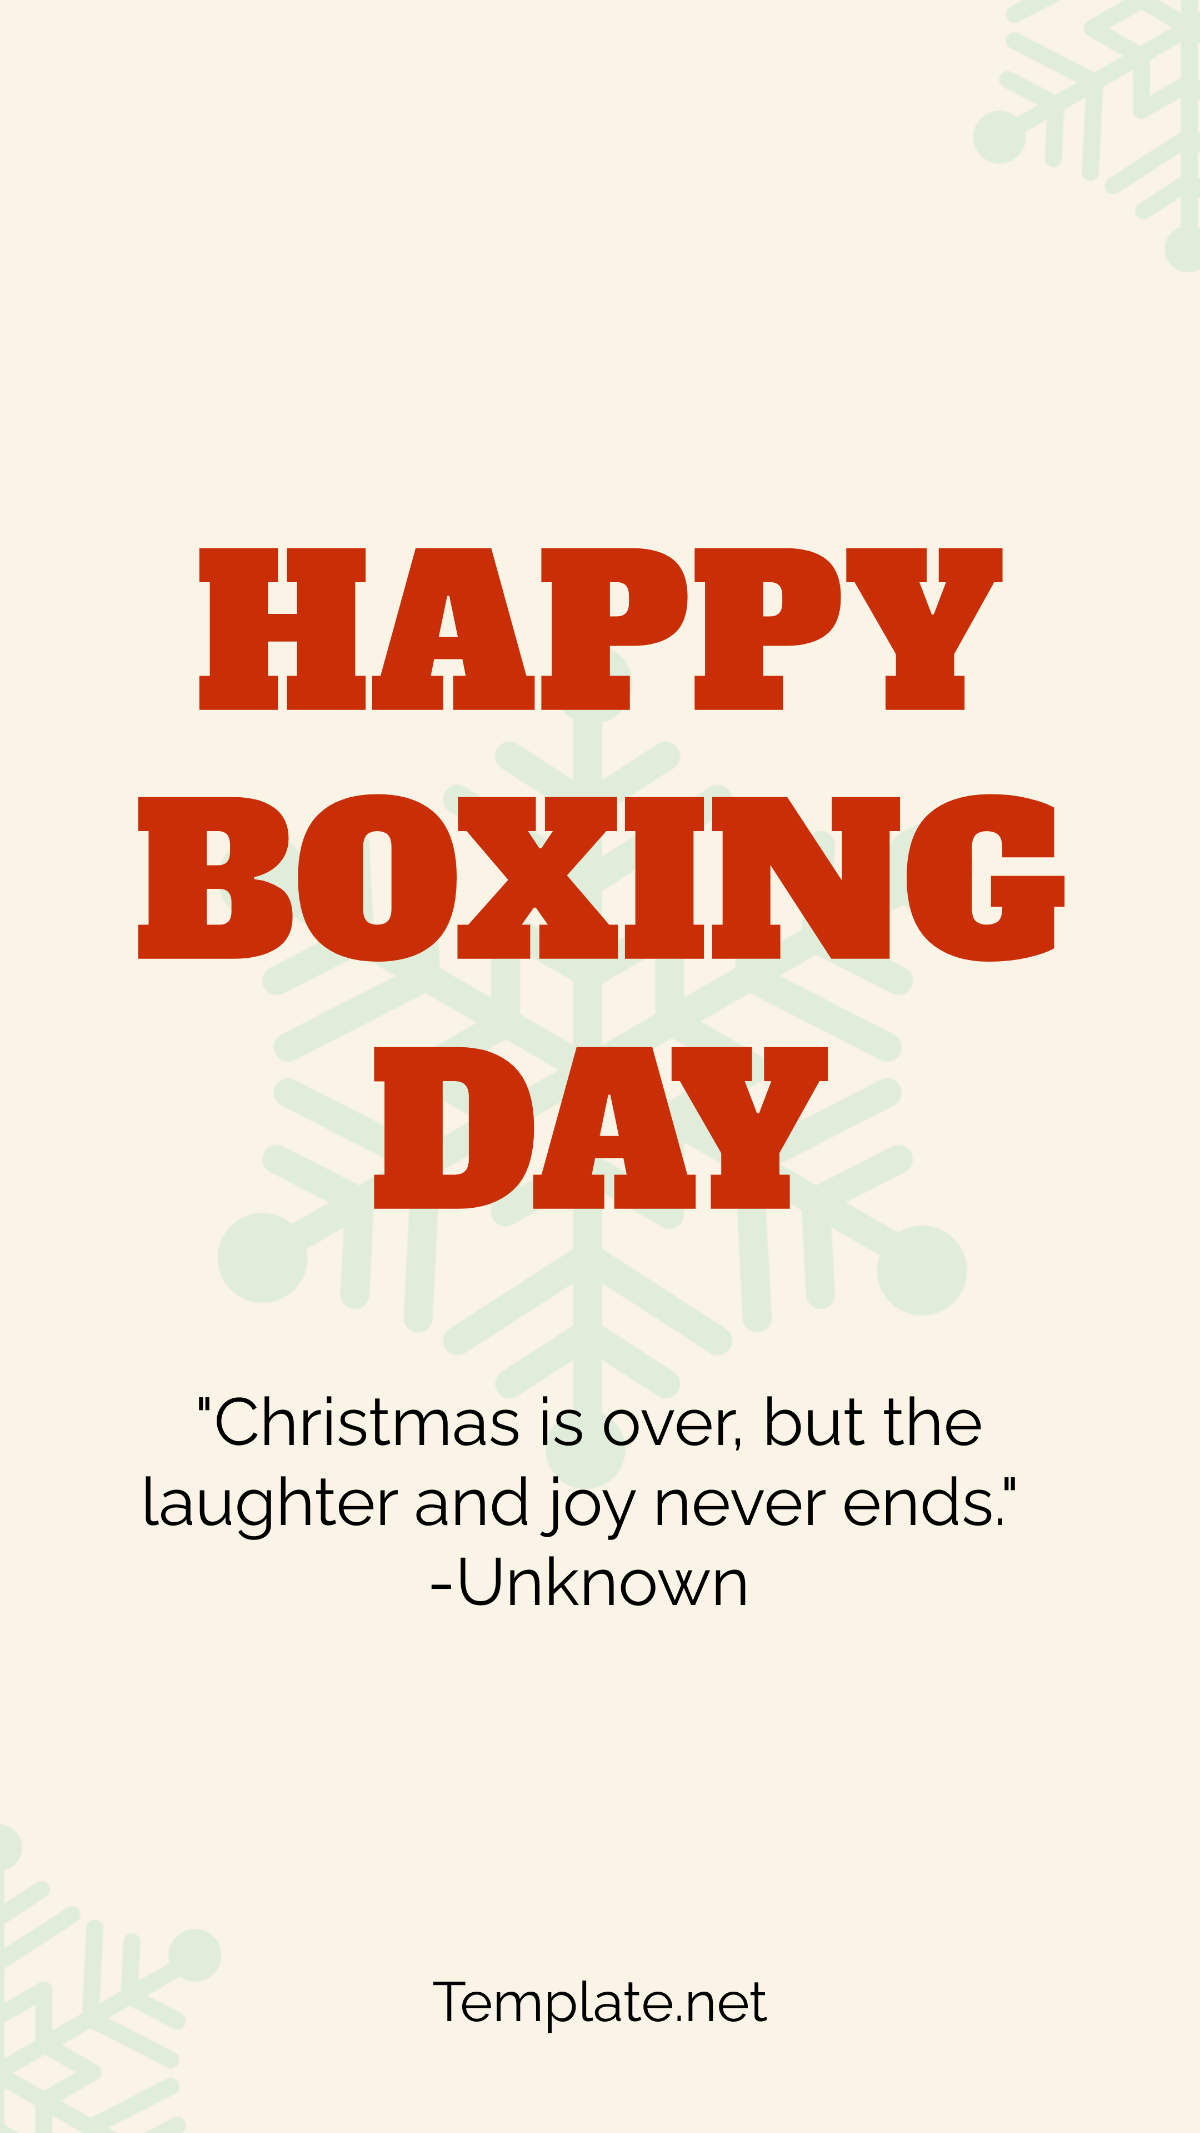 Free Boxing Day Quote Template